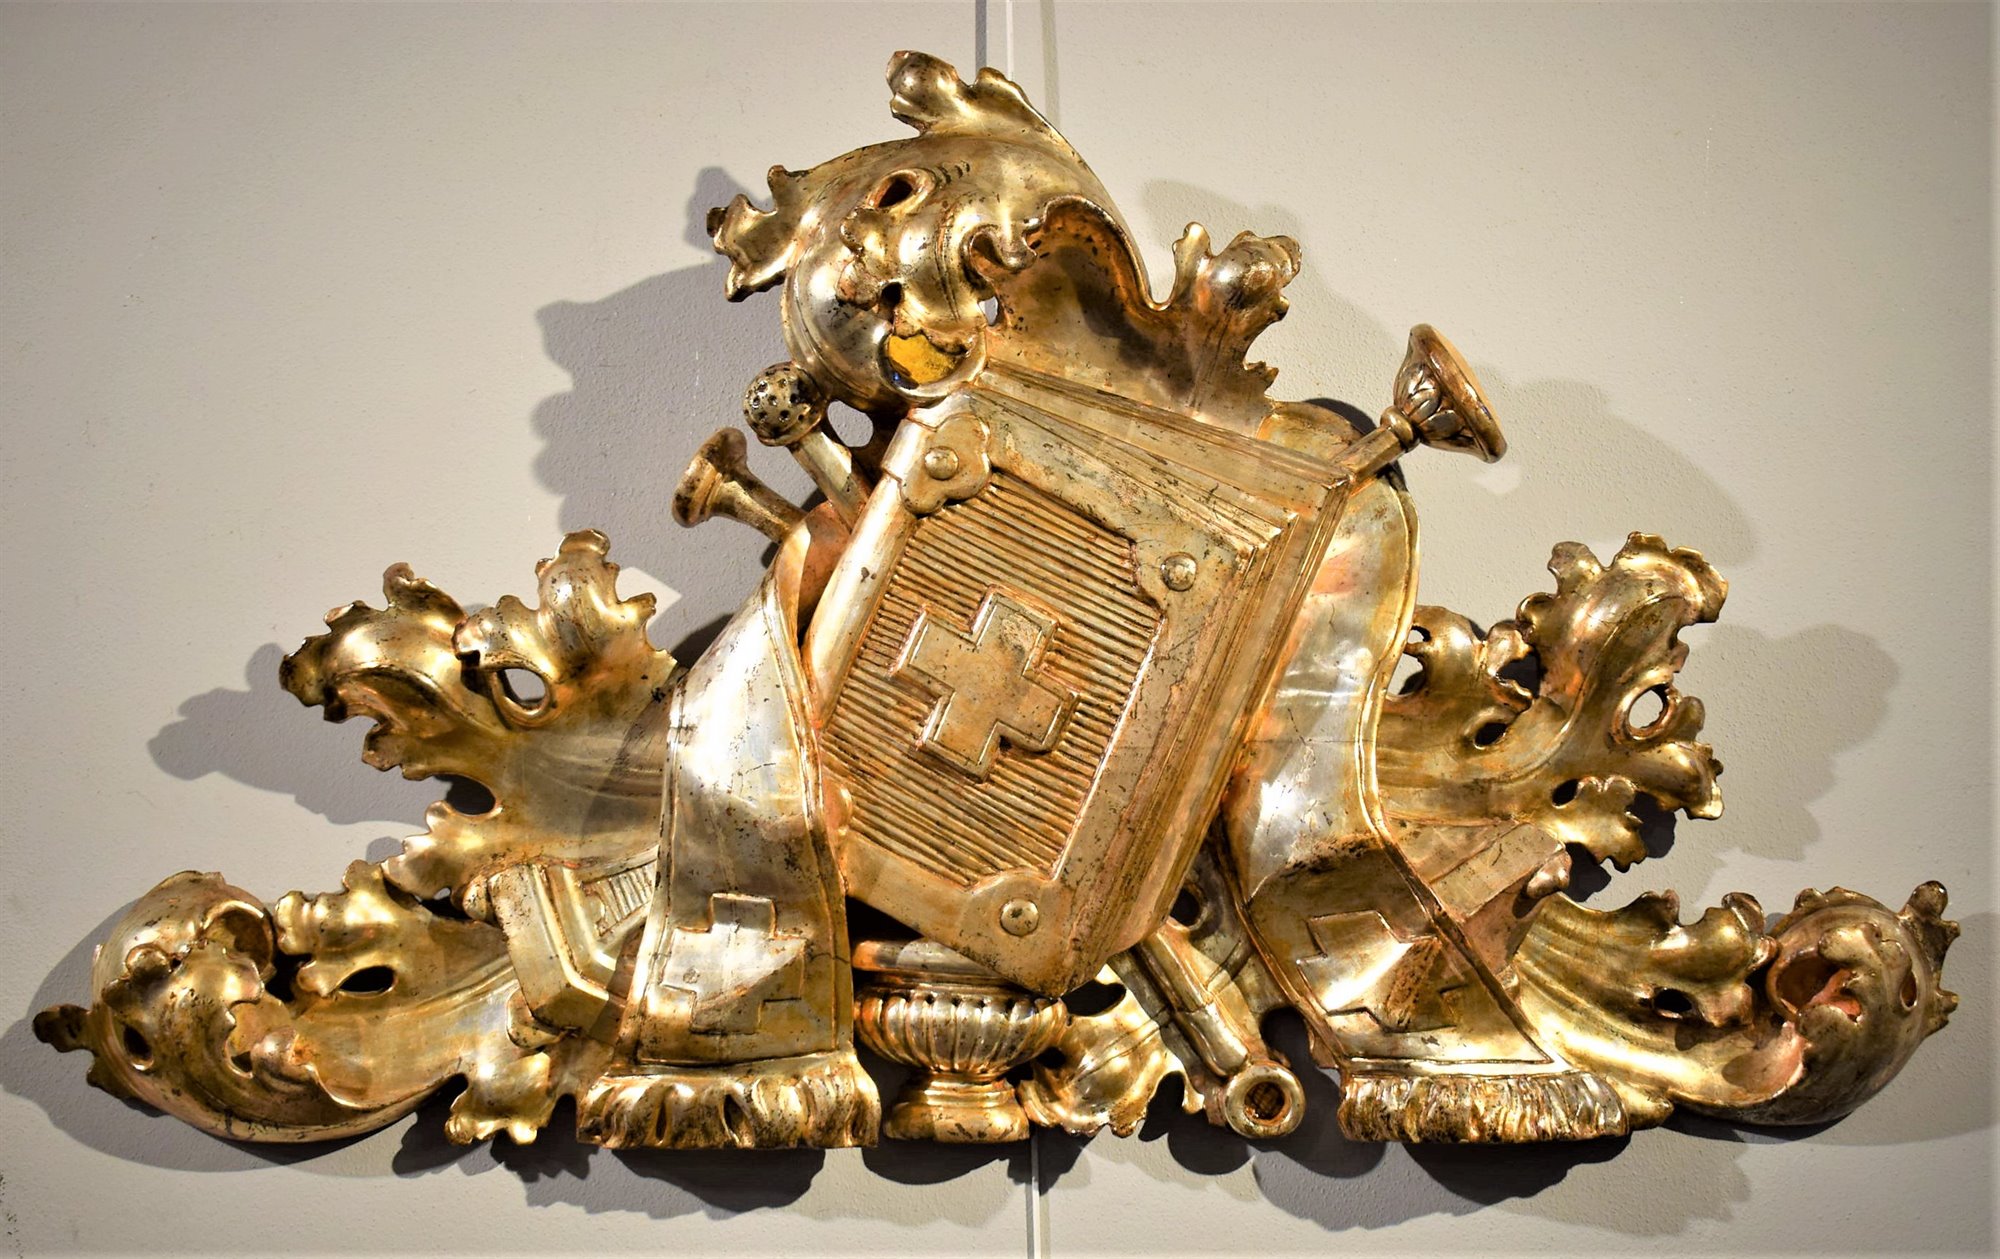 Carved and gilded baroque wooden frieze